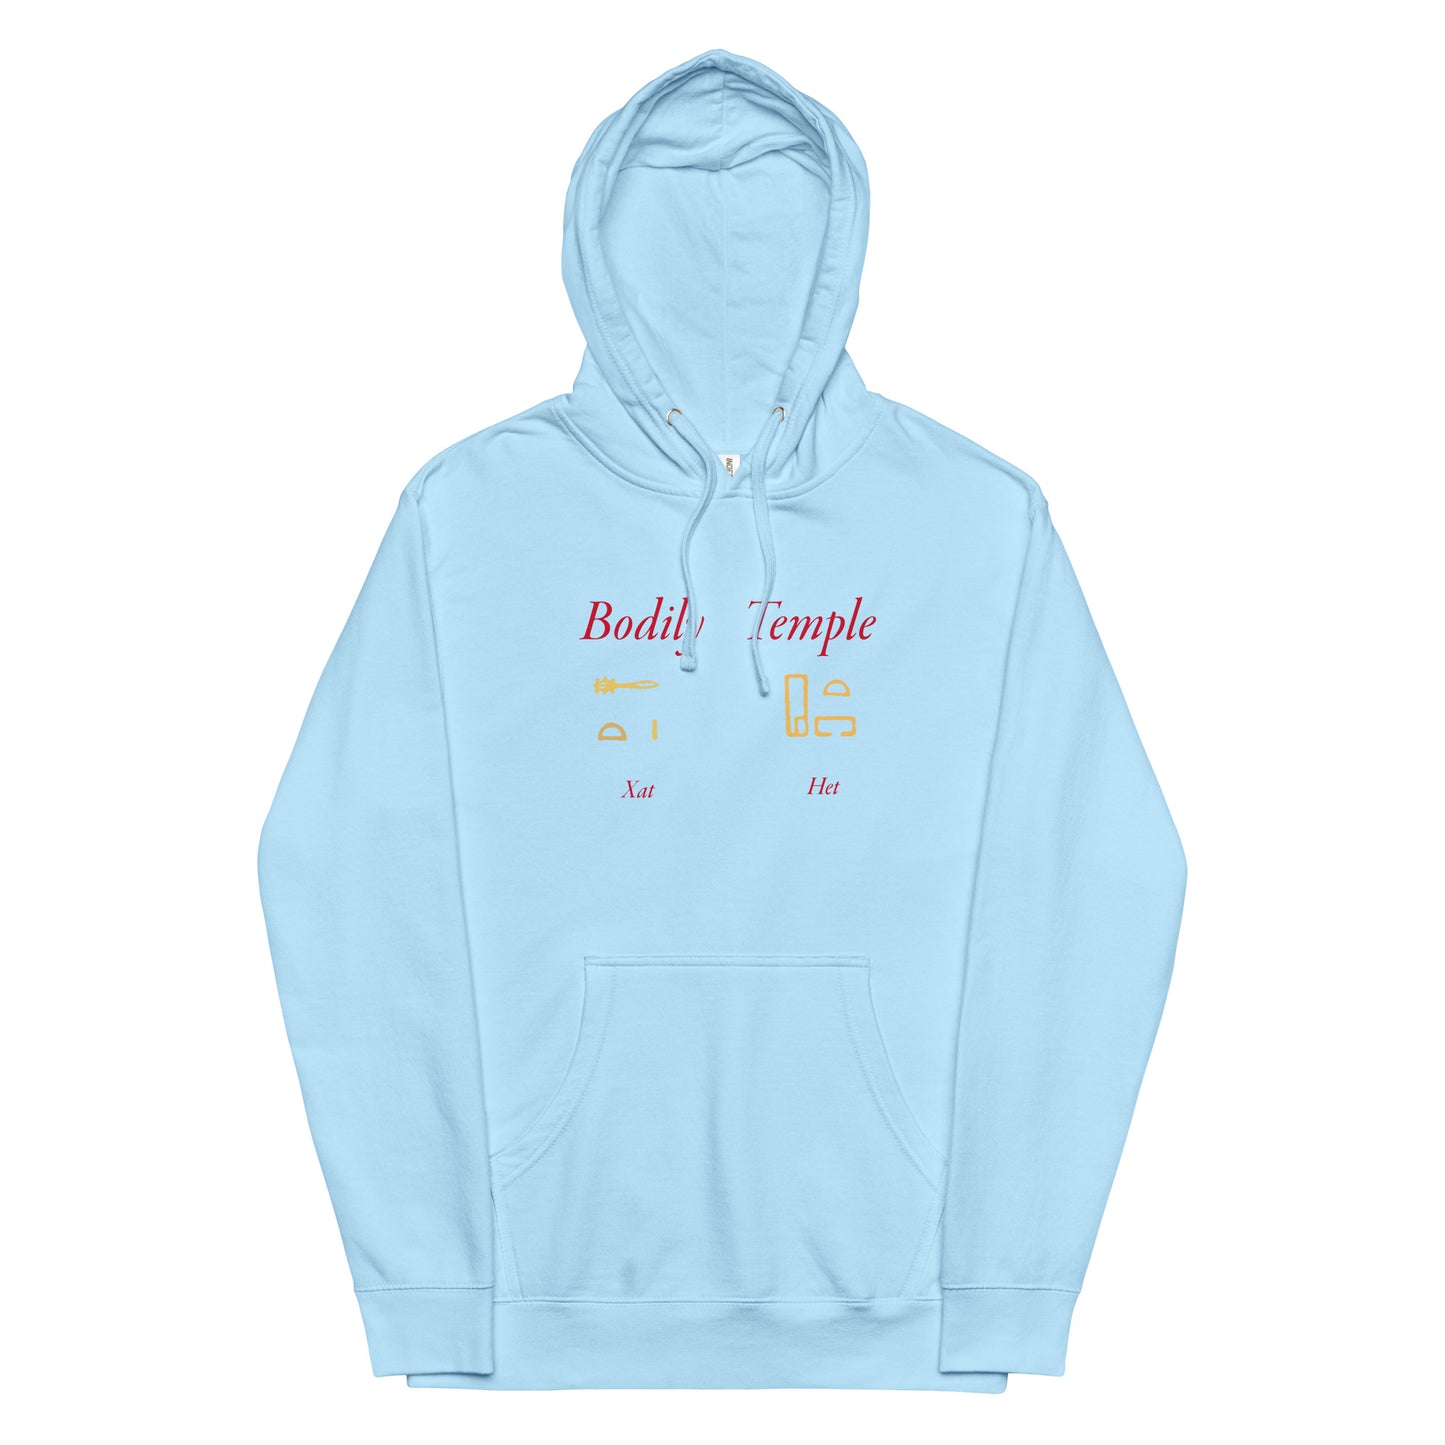 Bodily Temple Hoodie